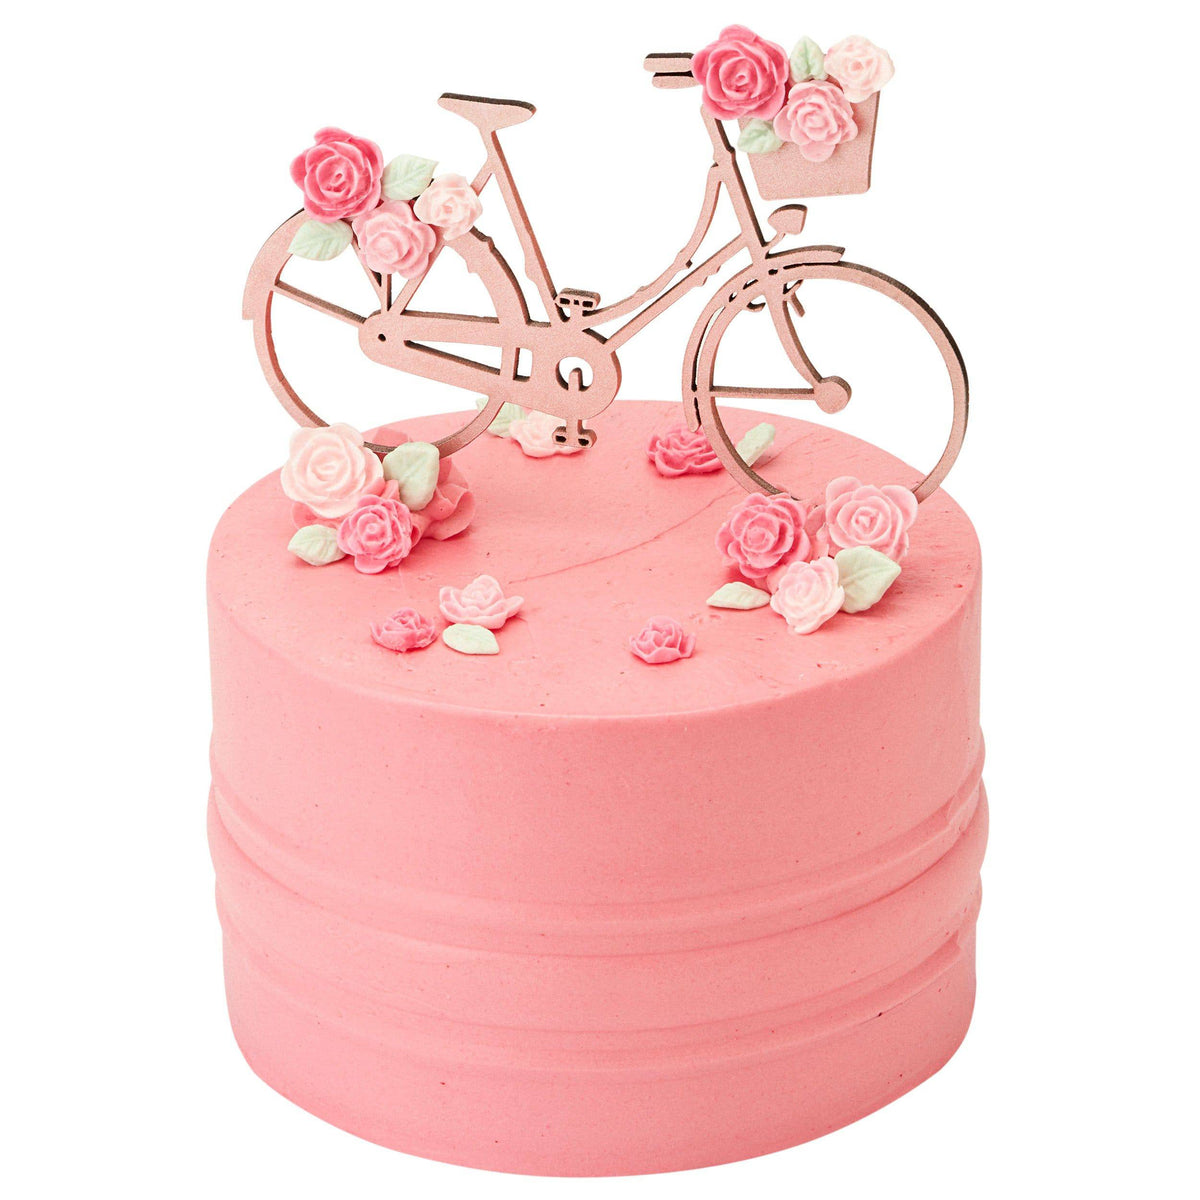 509 Bike Birthday Cake Images, Stock Photos, 3D objects, & Vectors |  Shutterstock